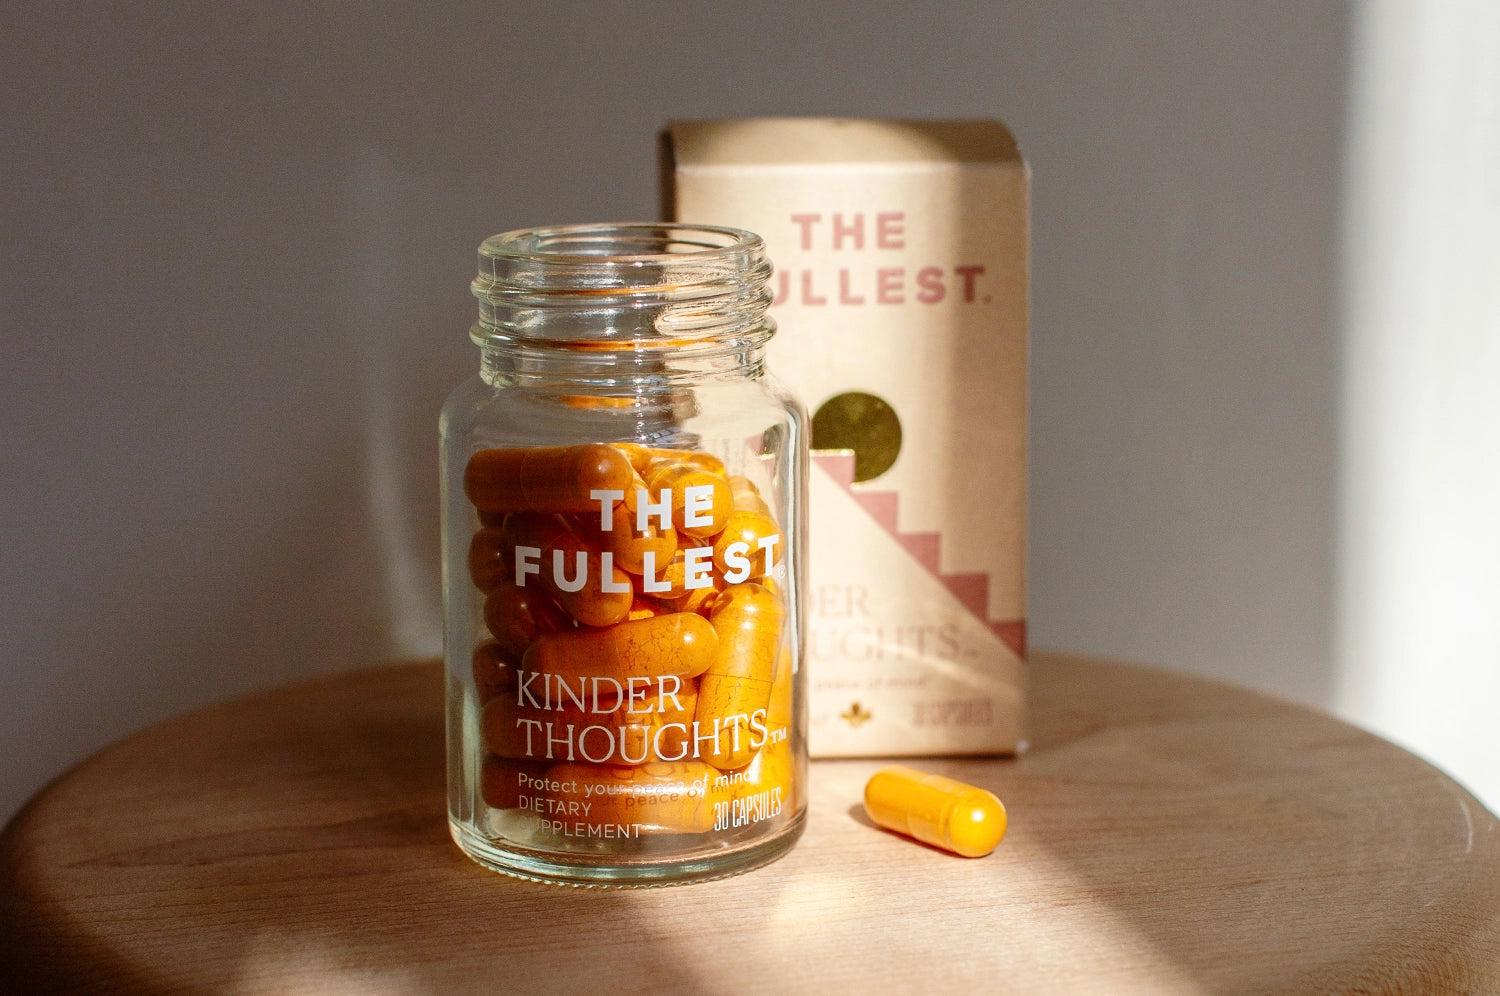 A bottle of THE FULLEST Kinder Thoughts saffron and turmeric supplement, with the lid off and placed next to its branded box.